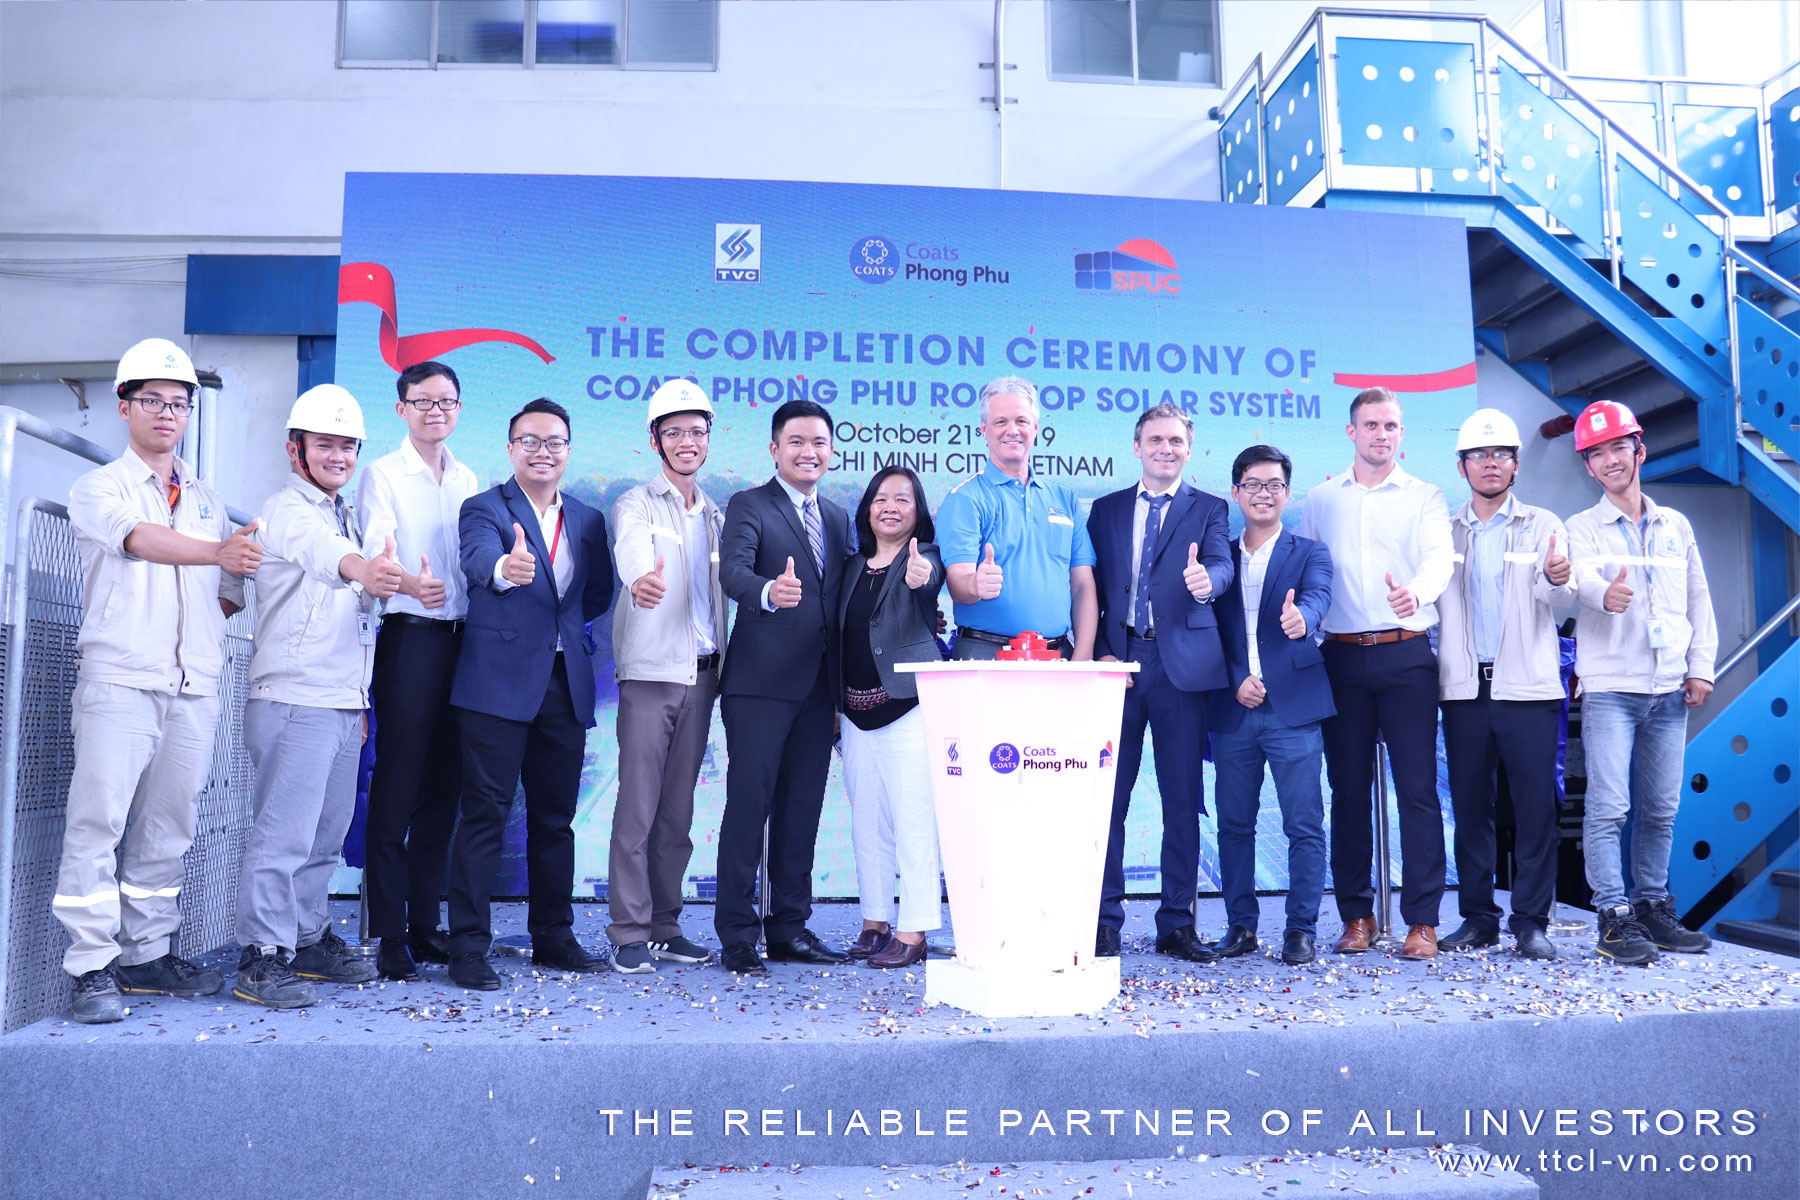 TTCL Vietnam attended the inauguration of solar rooftop Coats Phong Phu project